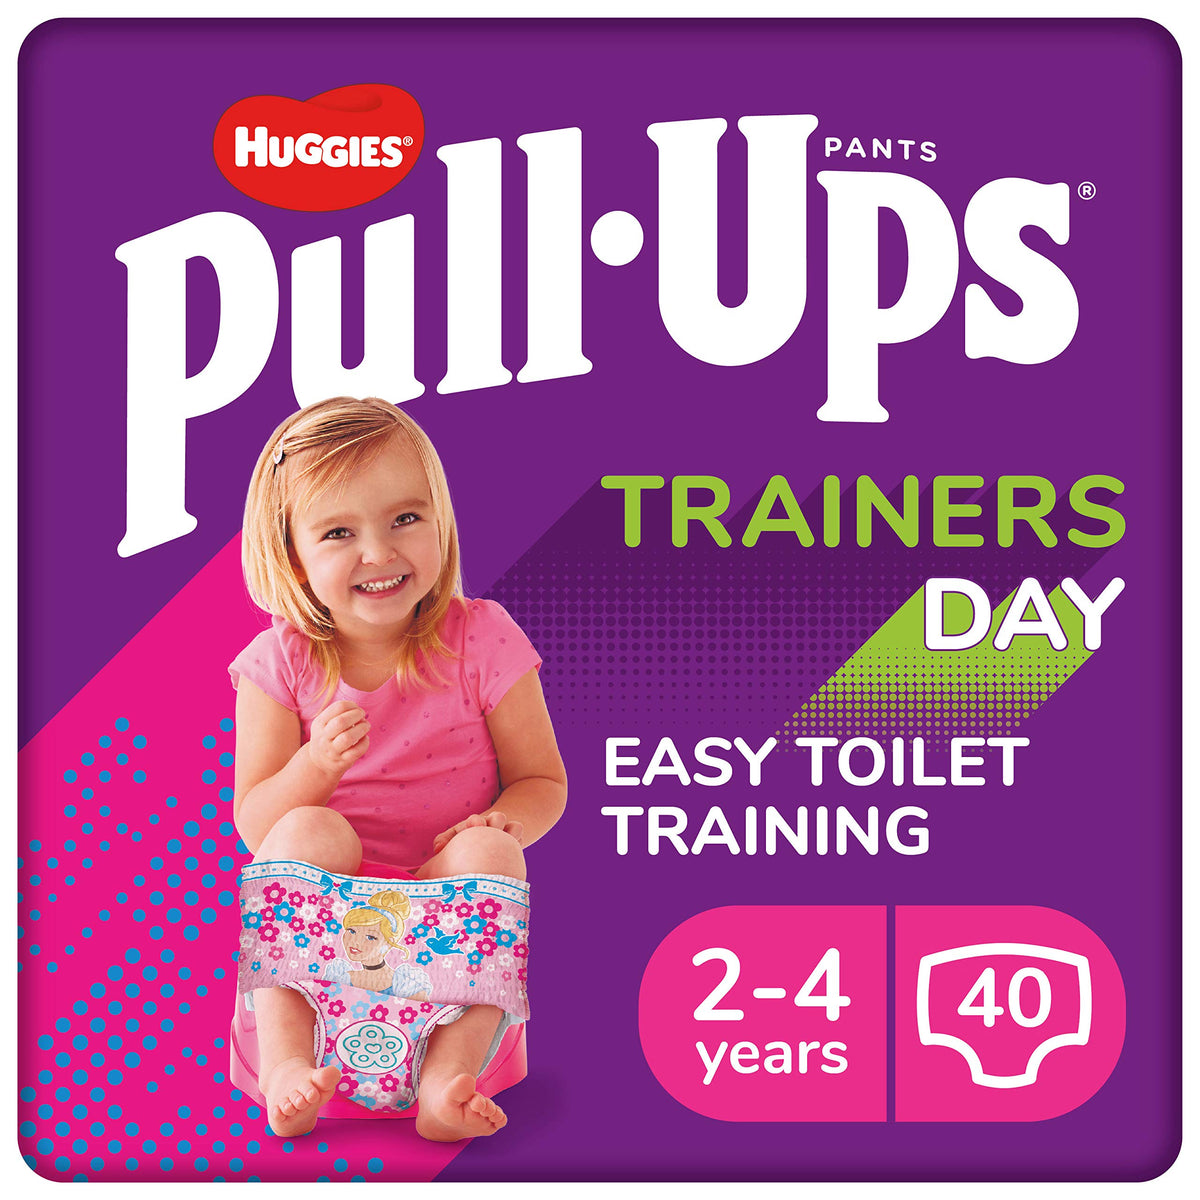 Huggies Pull-Ups, Trainers Day Nappy Pants for Girls - 2-4 Years, Size 6-7 Pull Up Nappies (40 Pants) - Essential Pull-Ups for Easy Toilet Training - Learn Wet From Dry